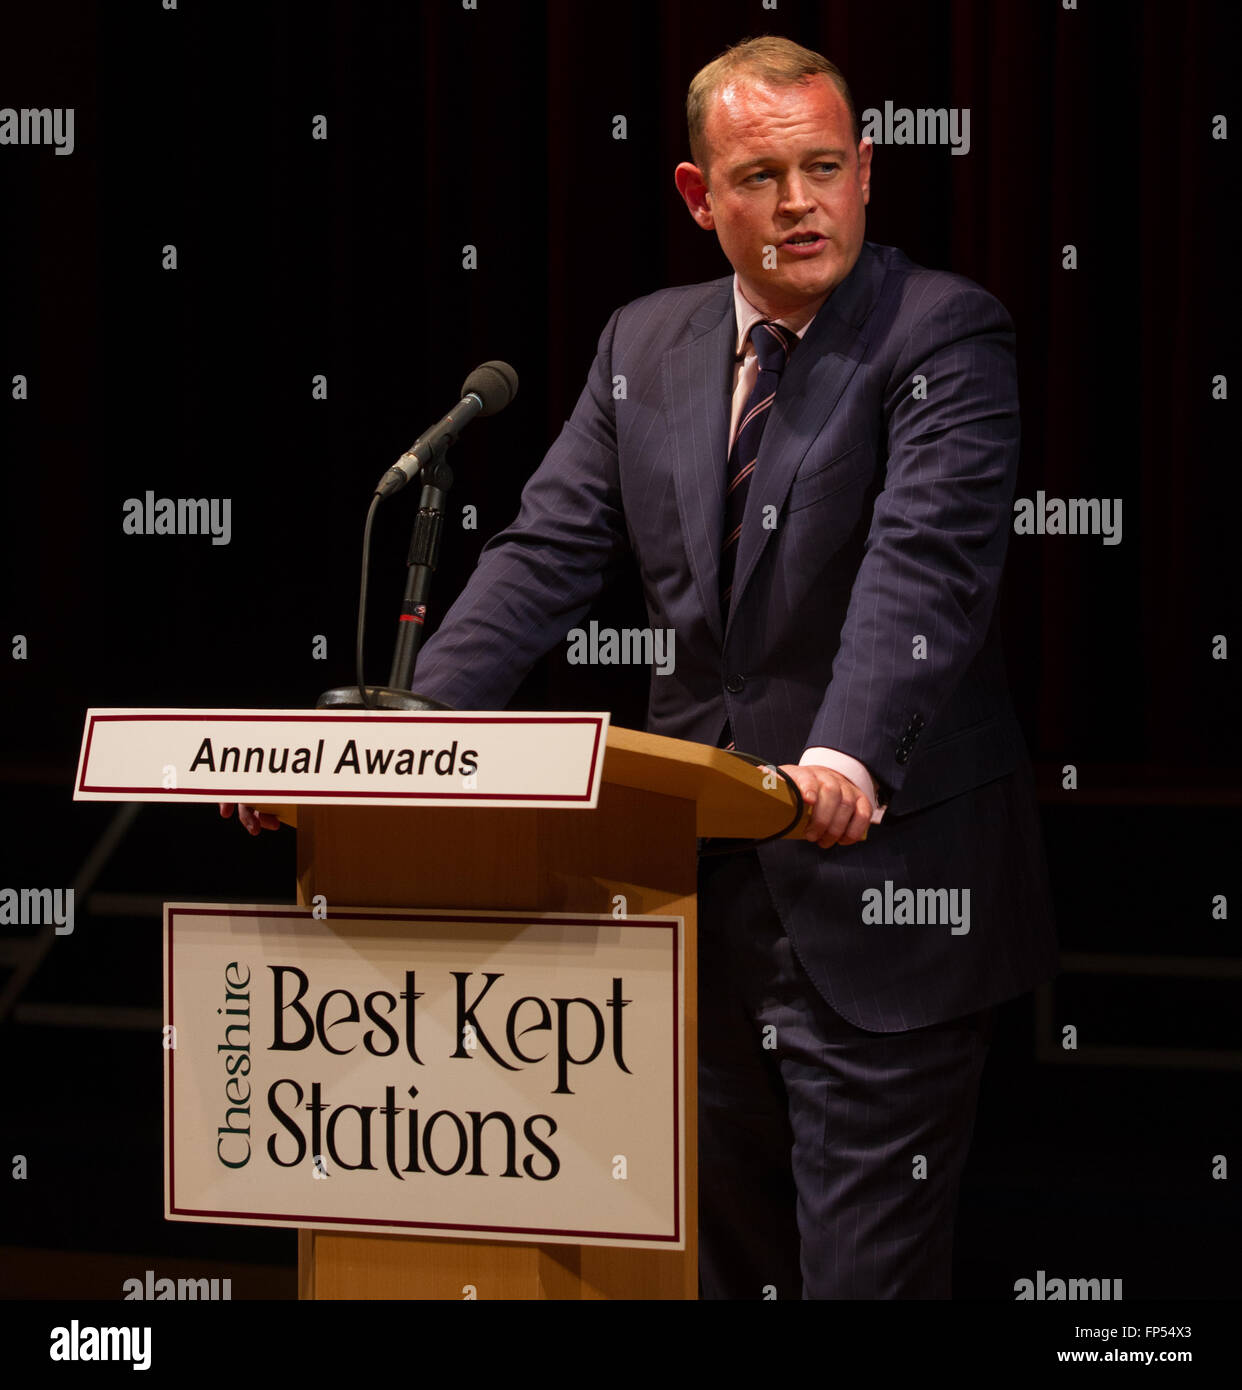 Alex Hynes, now Managing Director at Abellio Scotrail speaks at the Cheshire best kept stations awards. Stock Photo